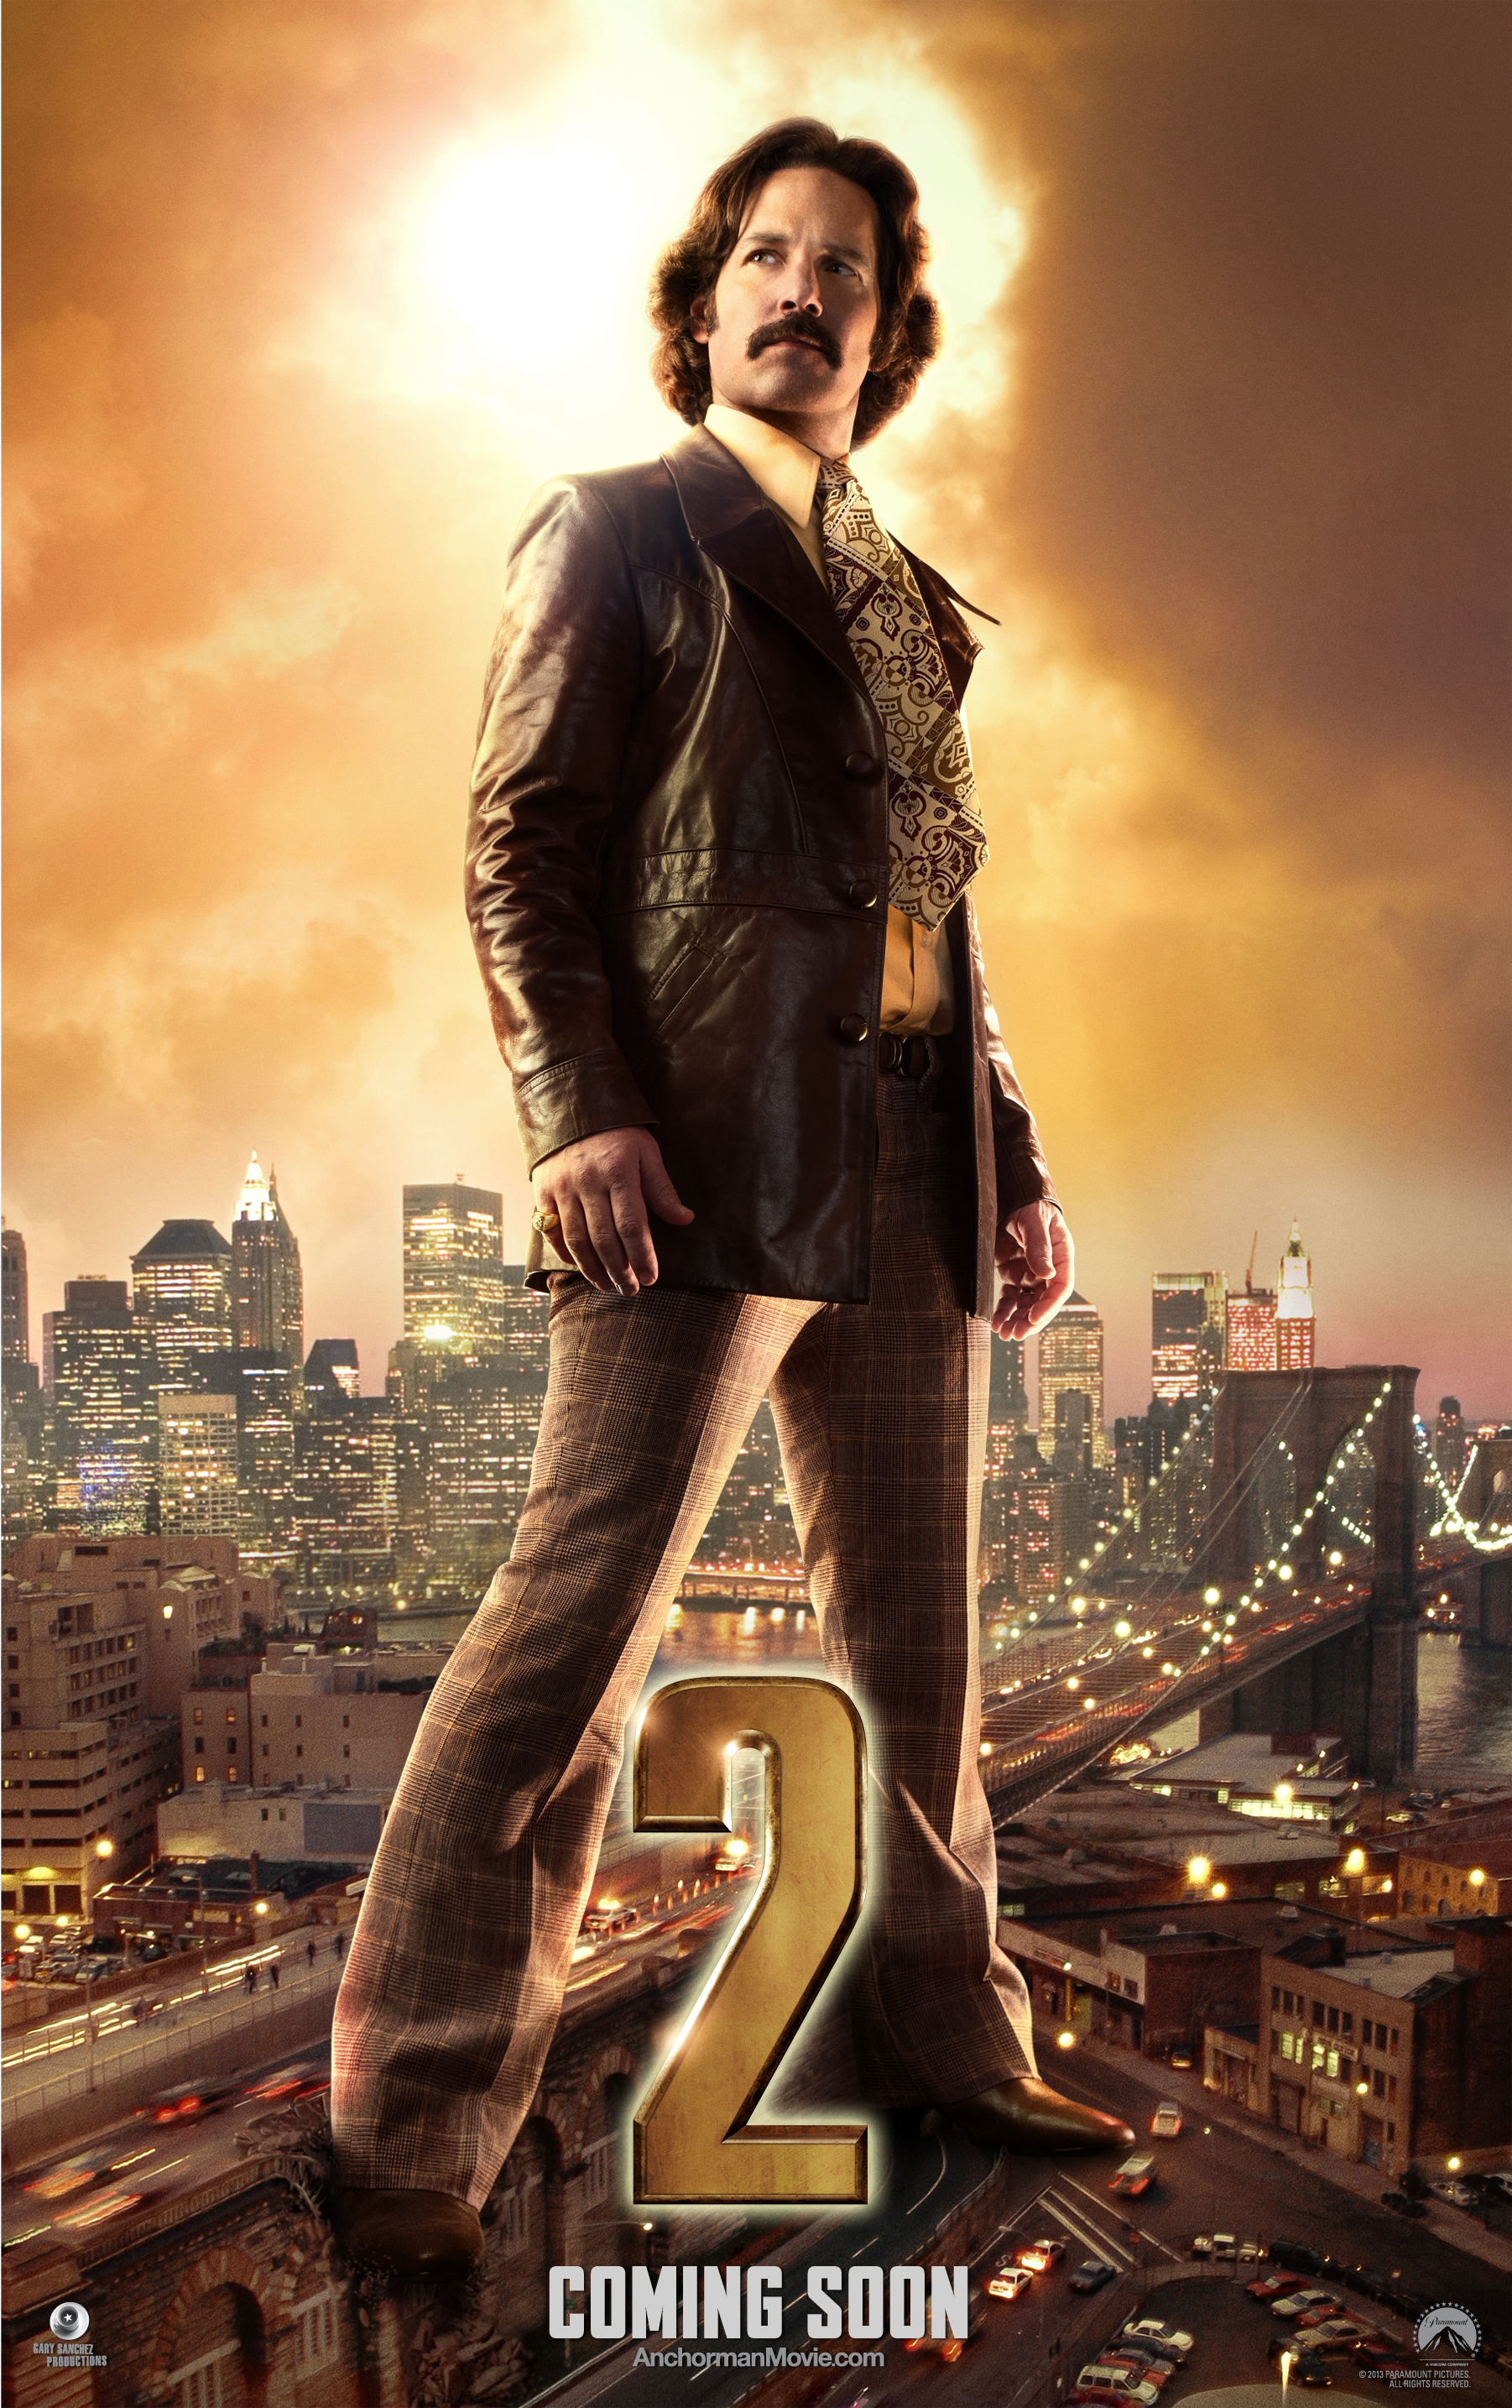 Anchorman 2: The Legend Continues #4